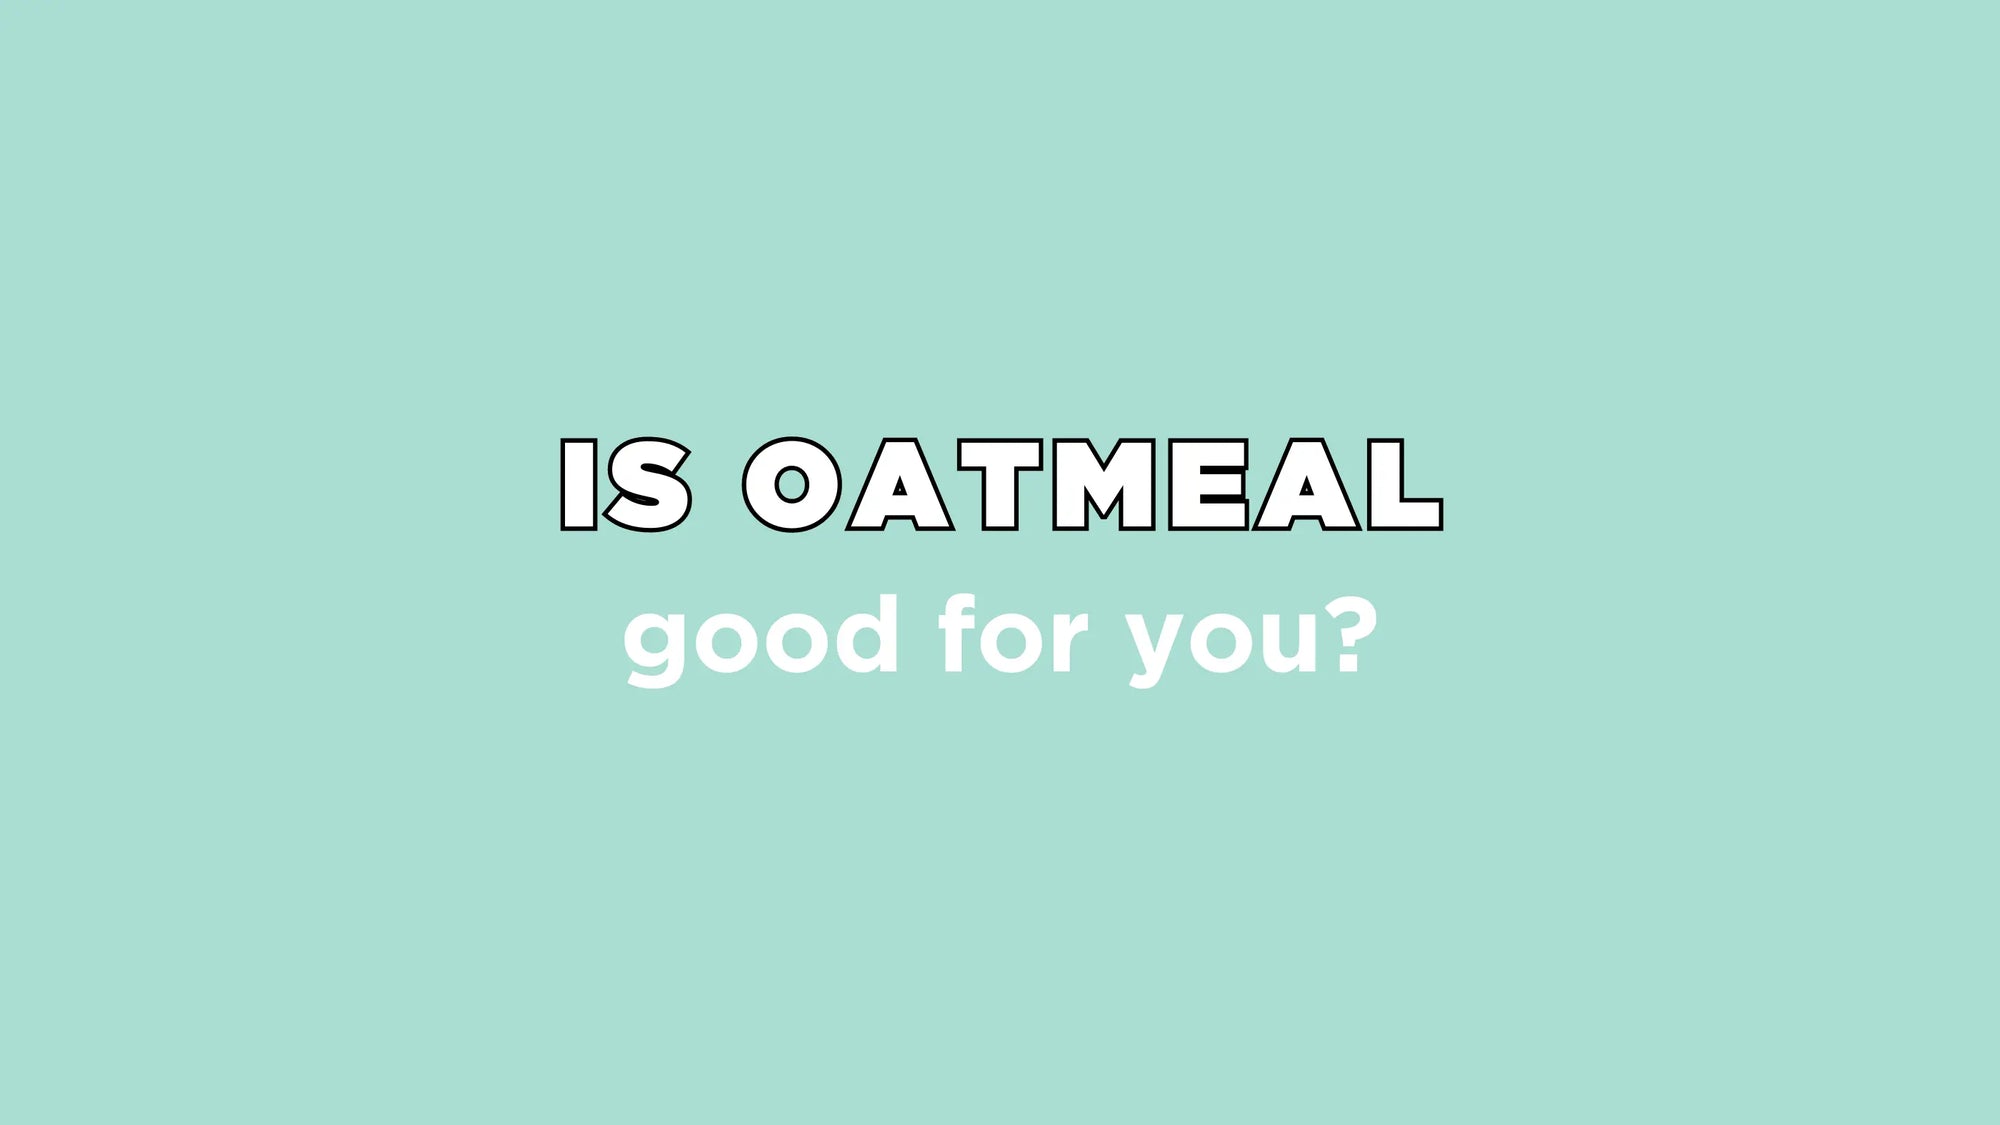 is oatmeal good for you?